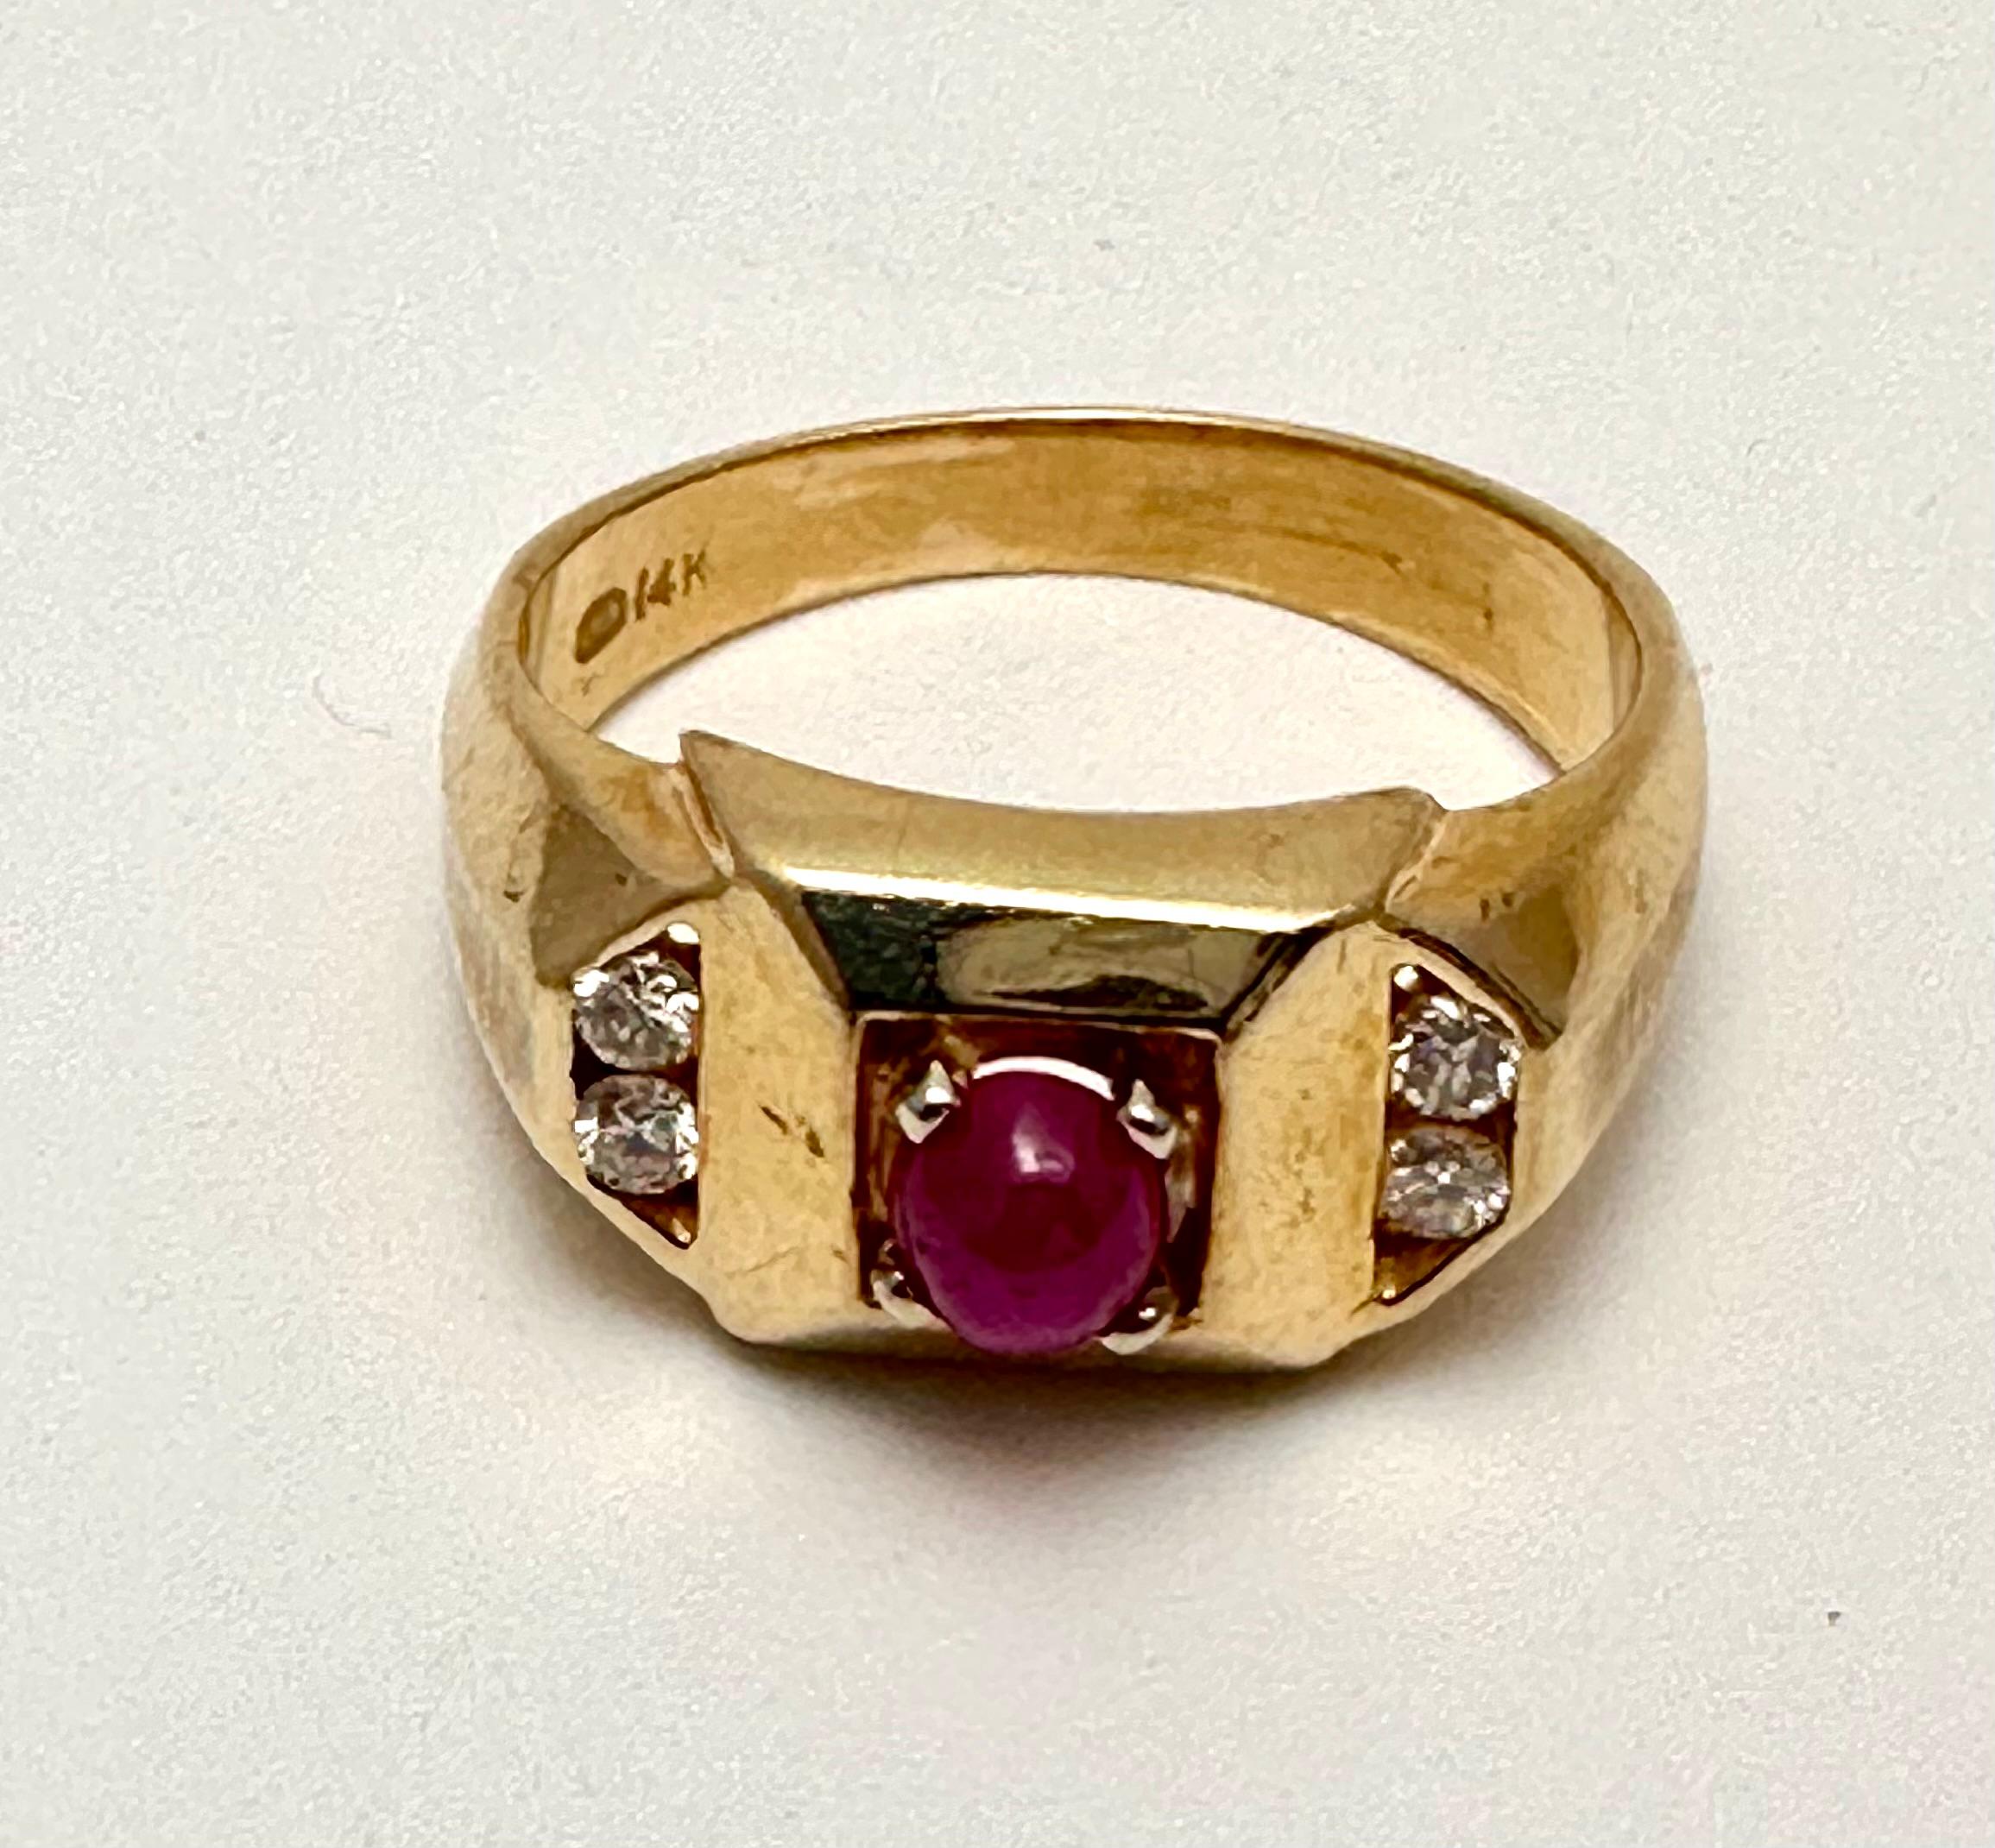 14k Yellow Gold 5mm Cabochon Ruby with 4 Round Diamonds Ring Size 9 1/2 For Sale 1